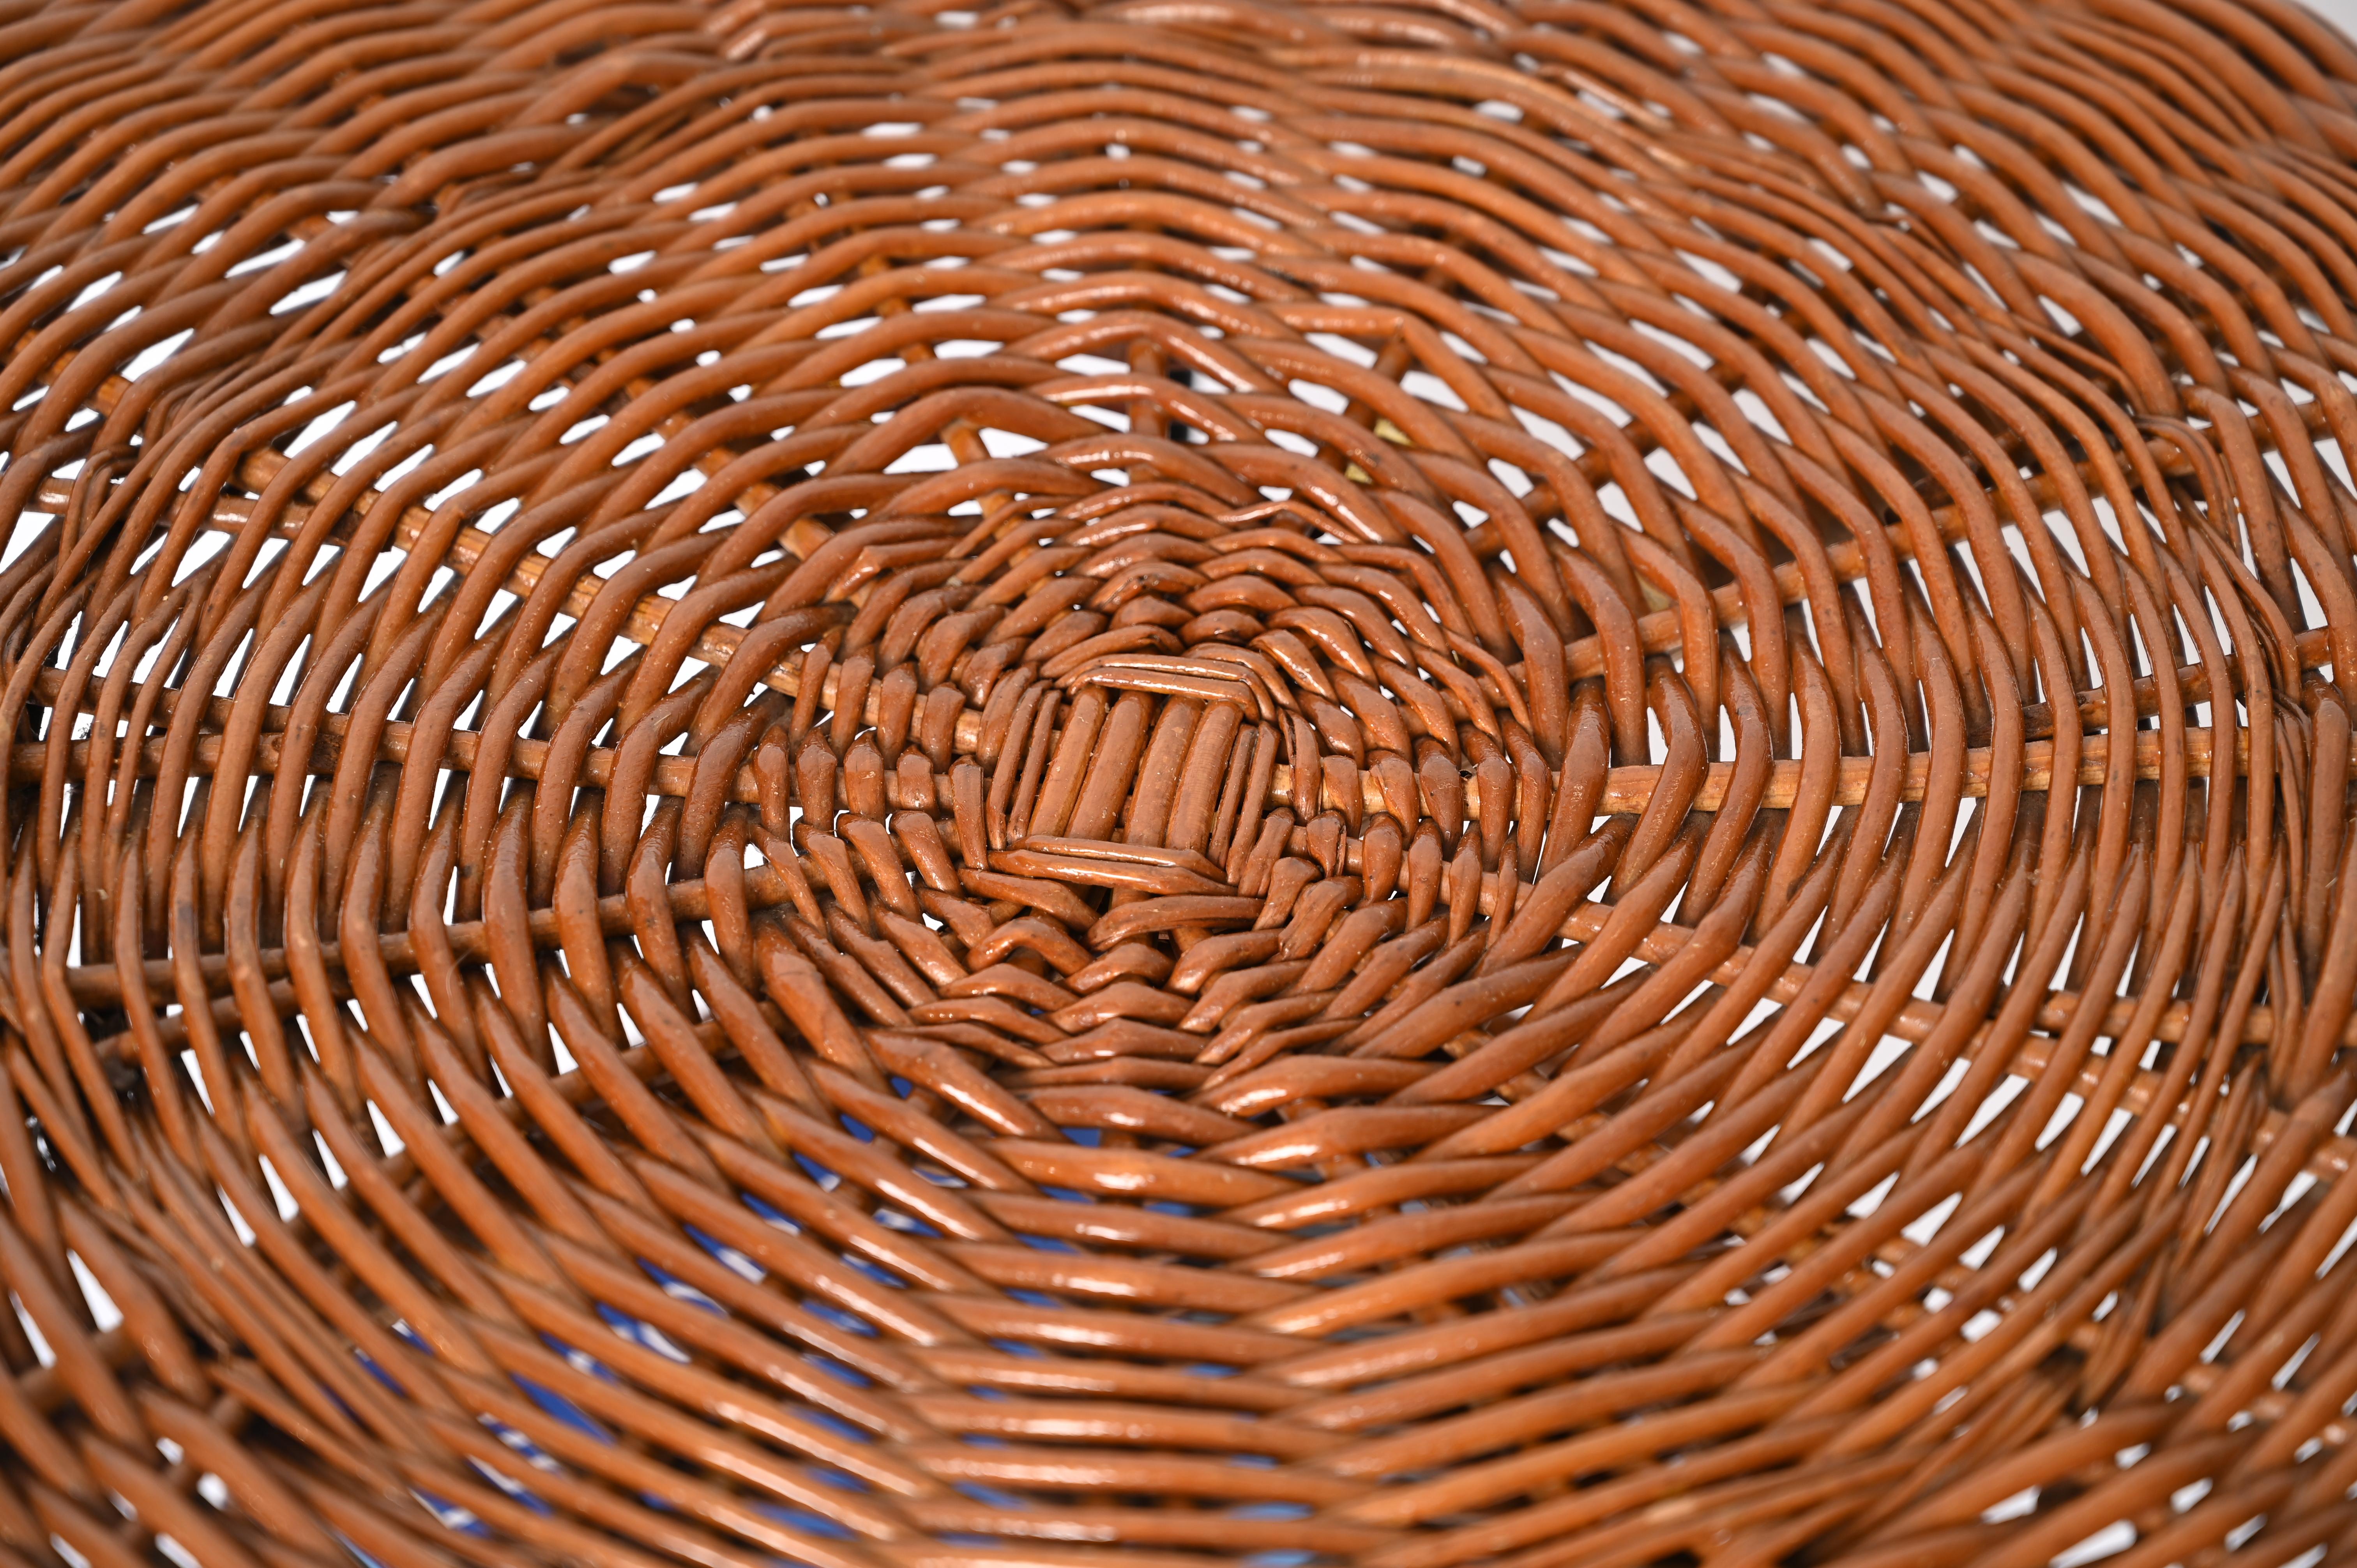 Woven Rattan, Wicker and Iron Two-Tier Round Coffee Table, Matégot, France 1960s For Sale 7